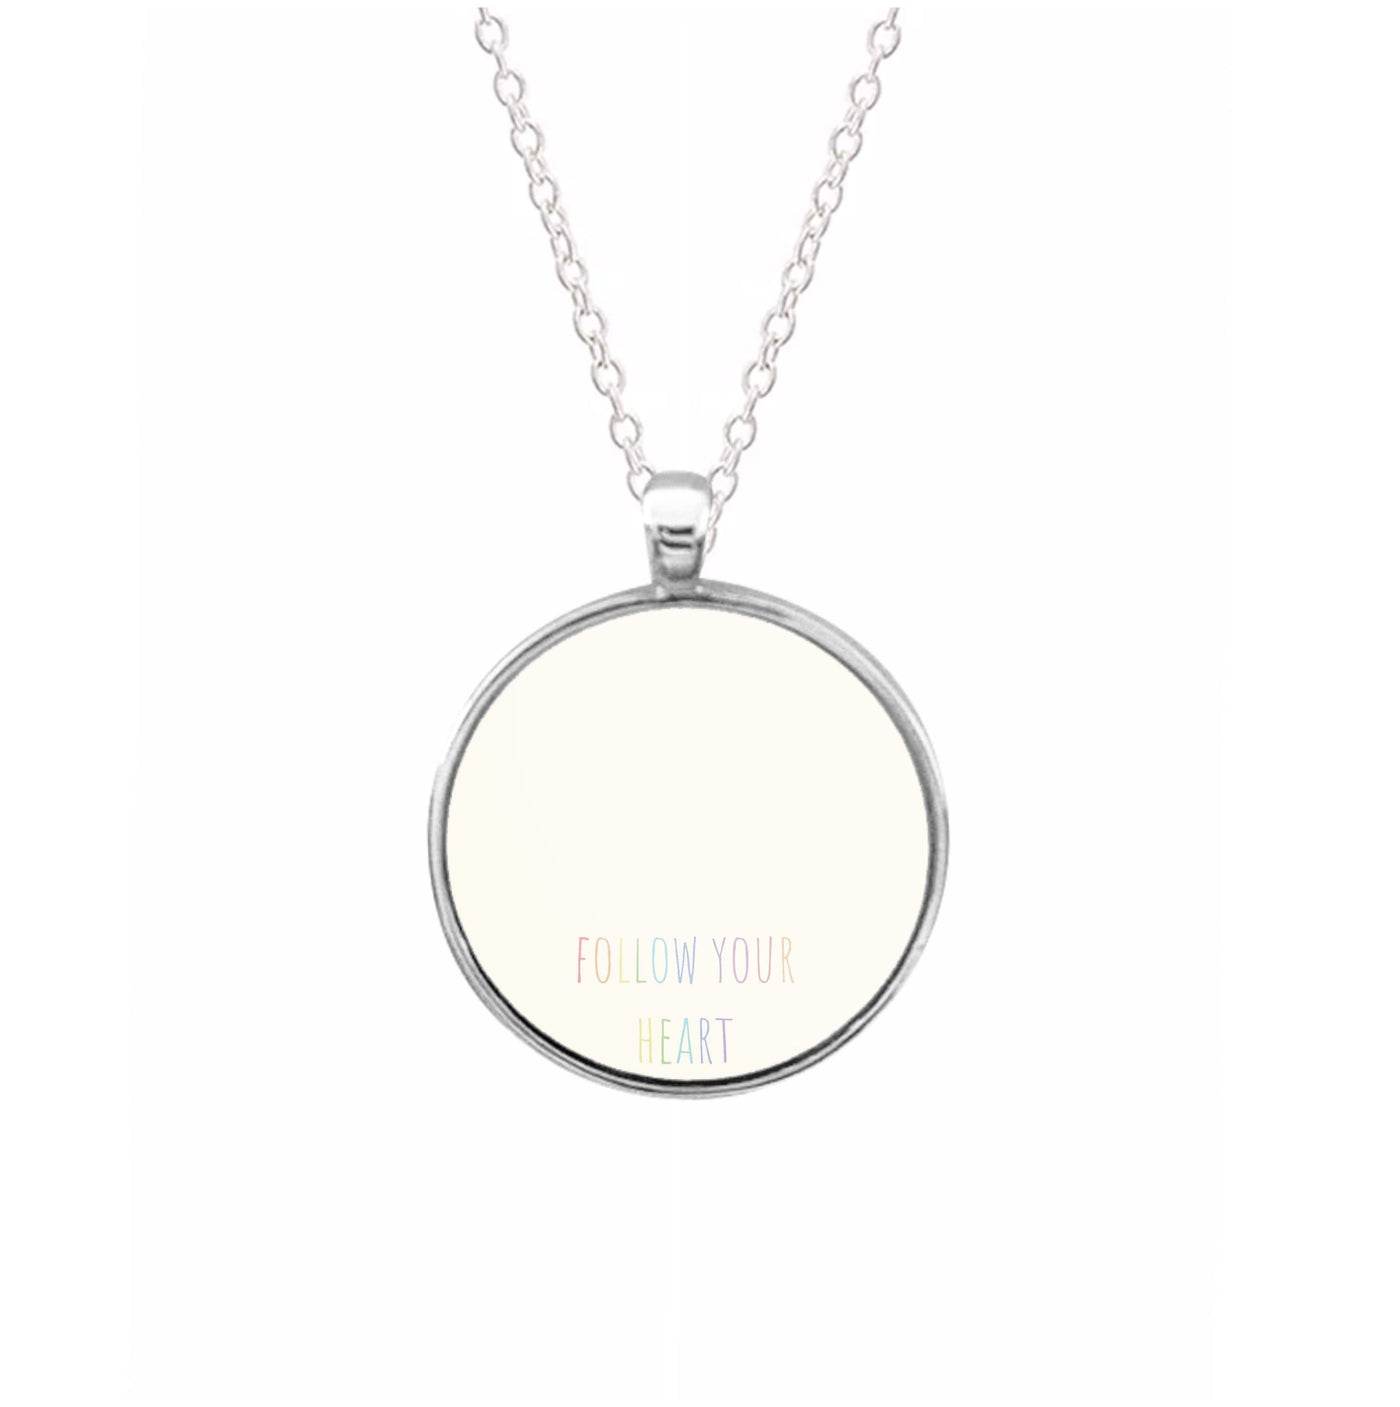 Follow Your Heart - Pride Necklace